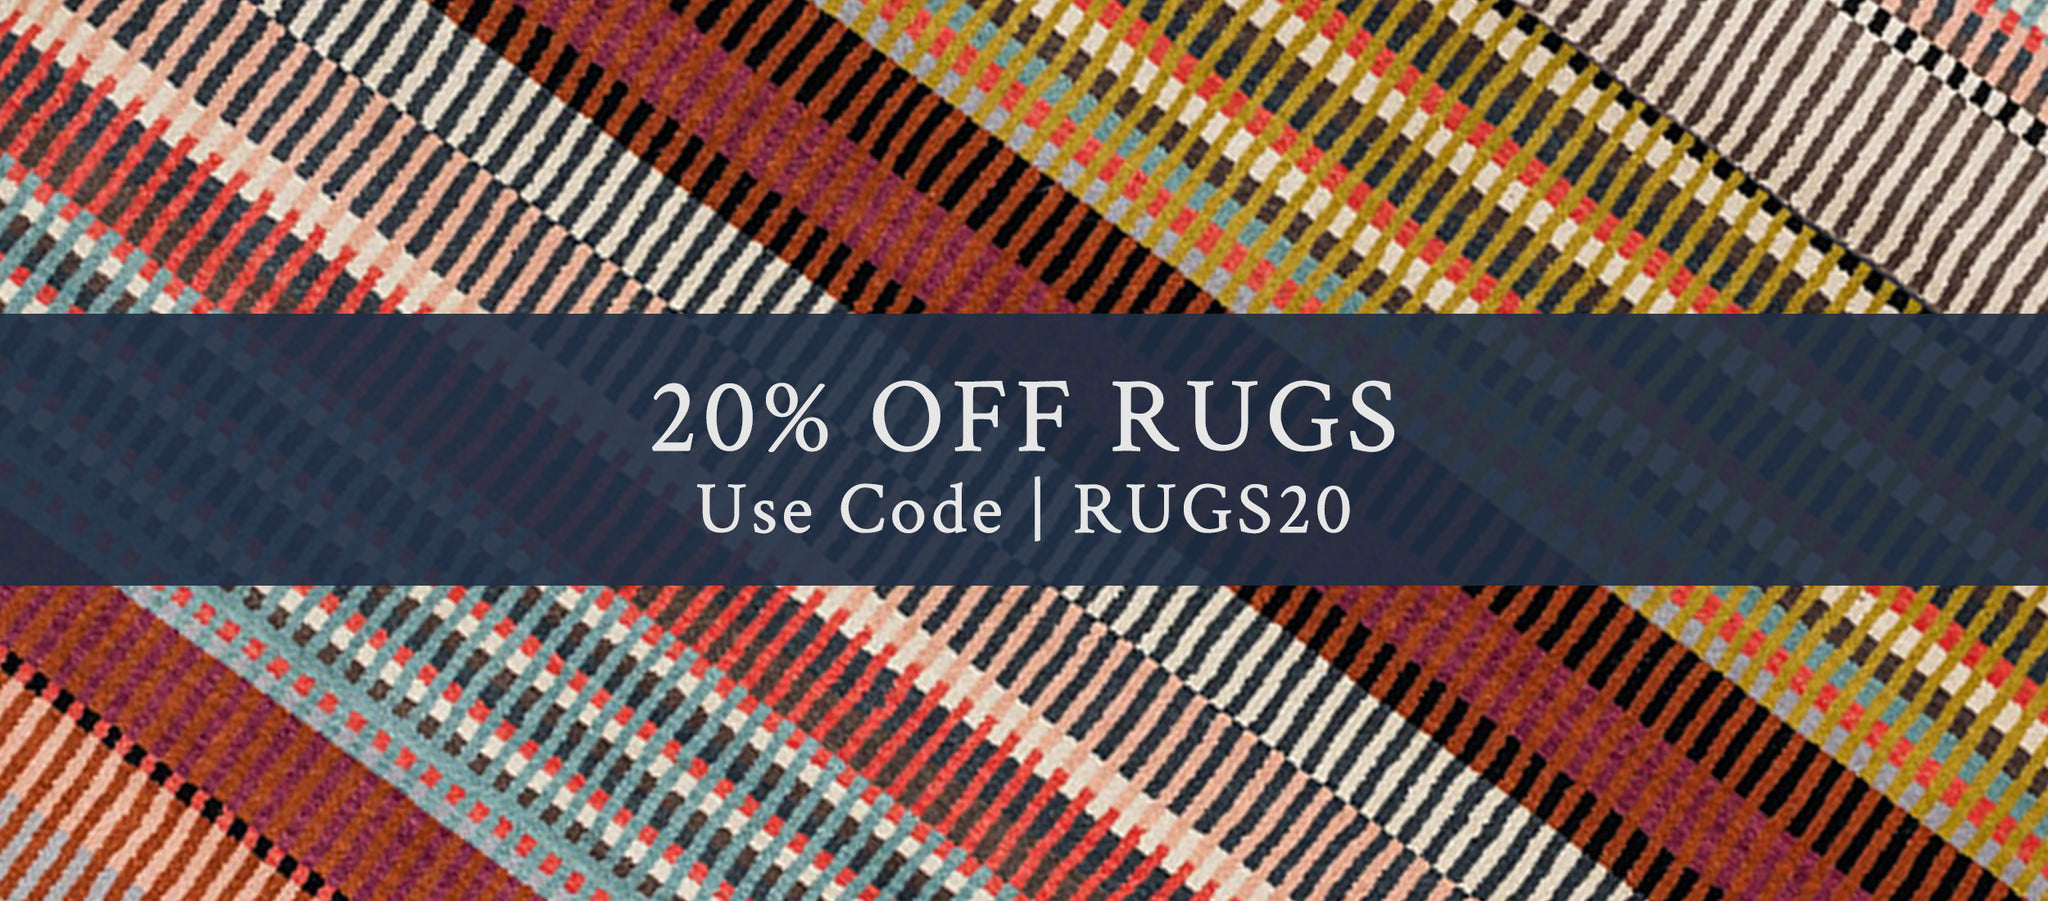 20% OFF RUGS | Use Code: RUGS20